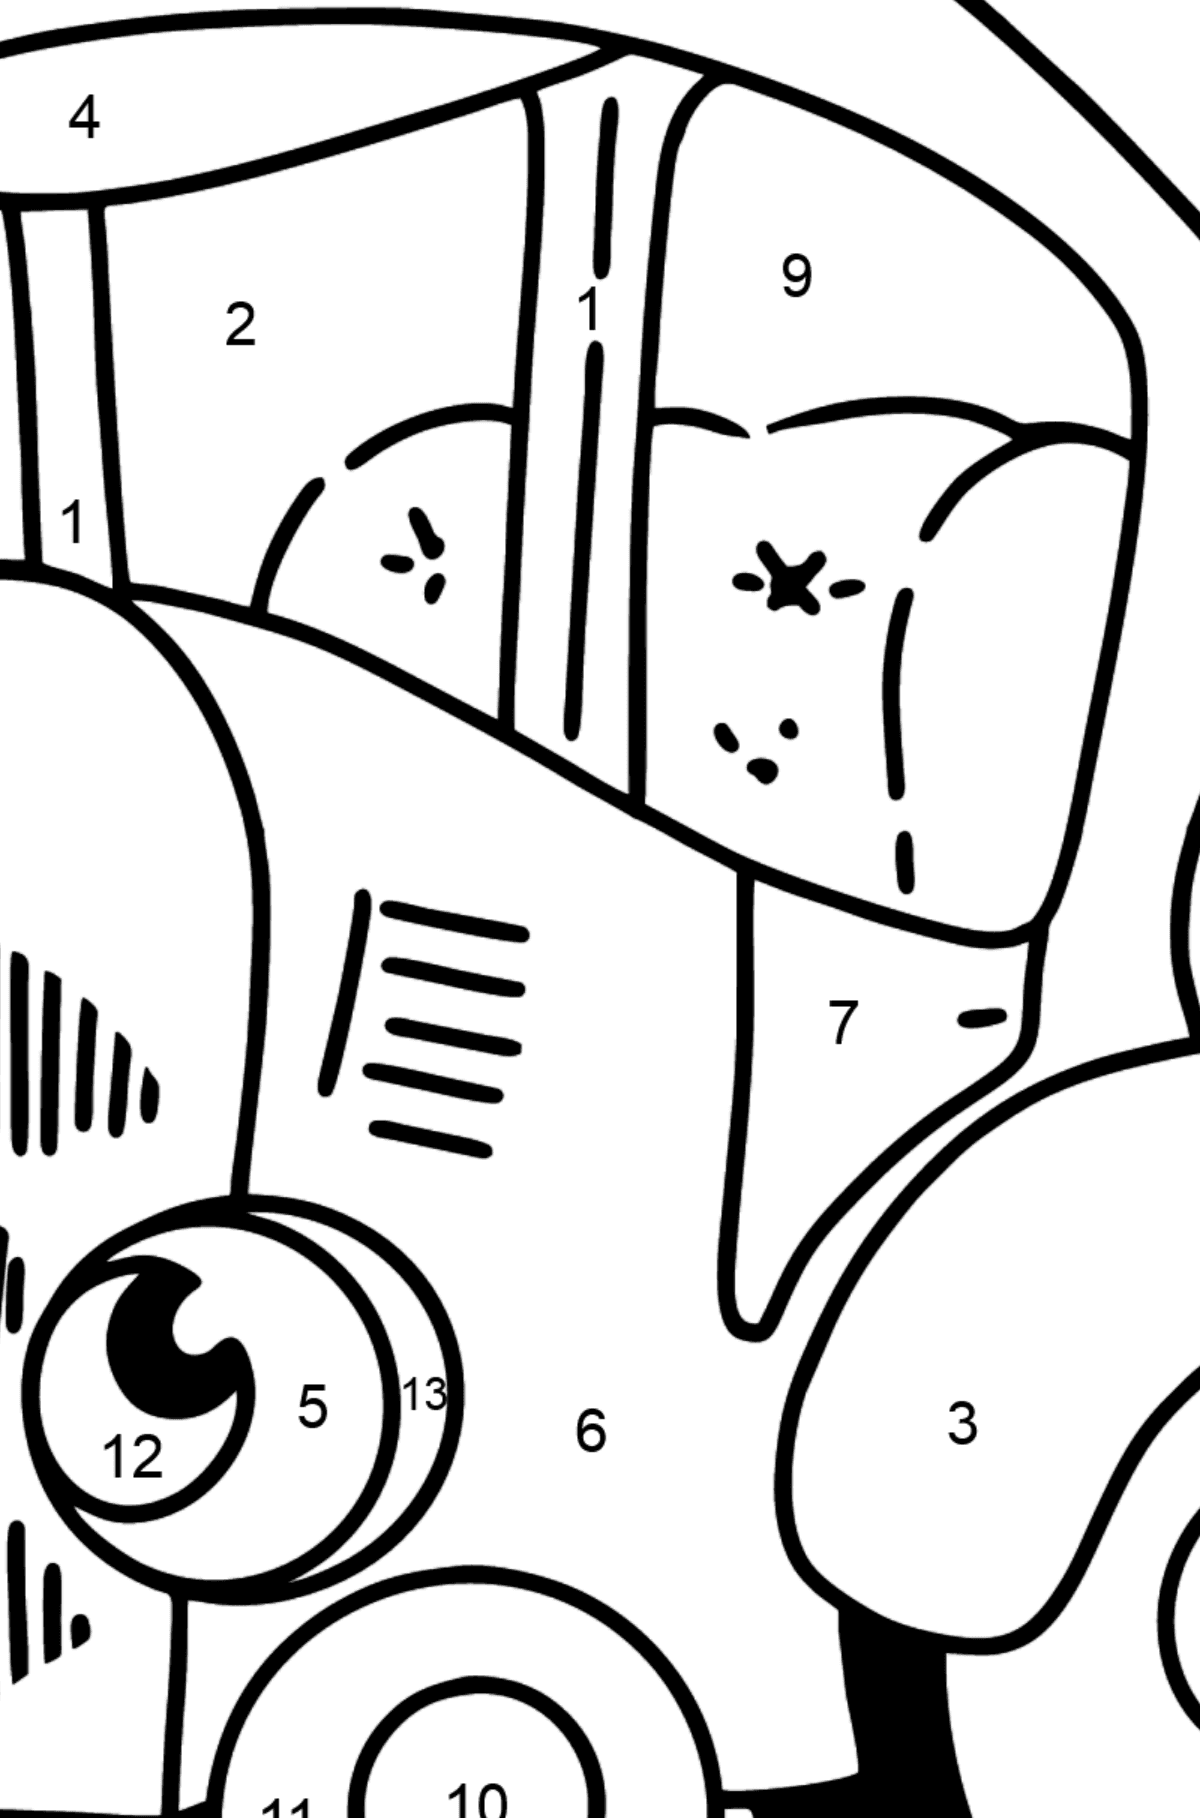 Blue Tractor coloring page - Coloring by Numbers for Kids